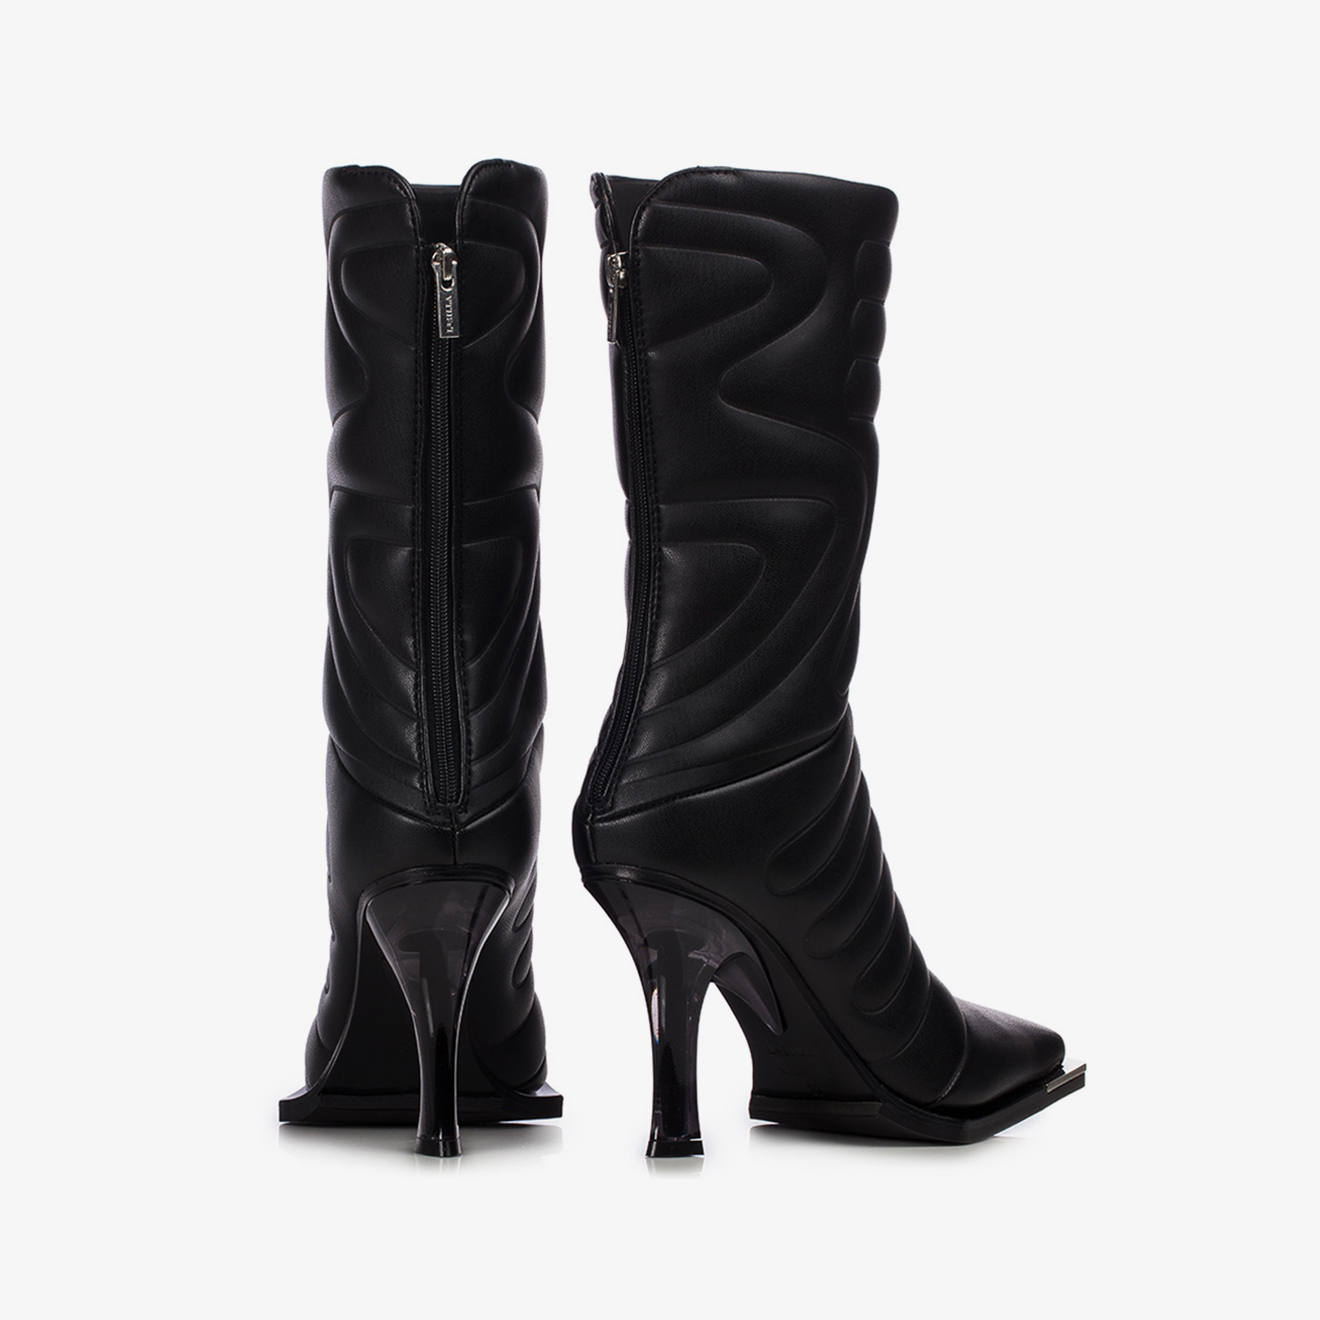 TECHNO ANKLE BOOT 80 mm - Le Silla official outlet